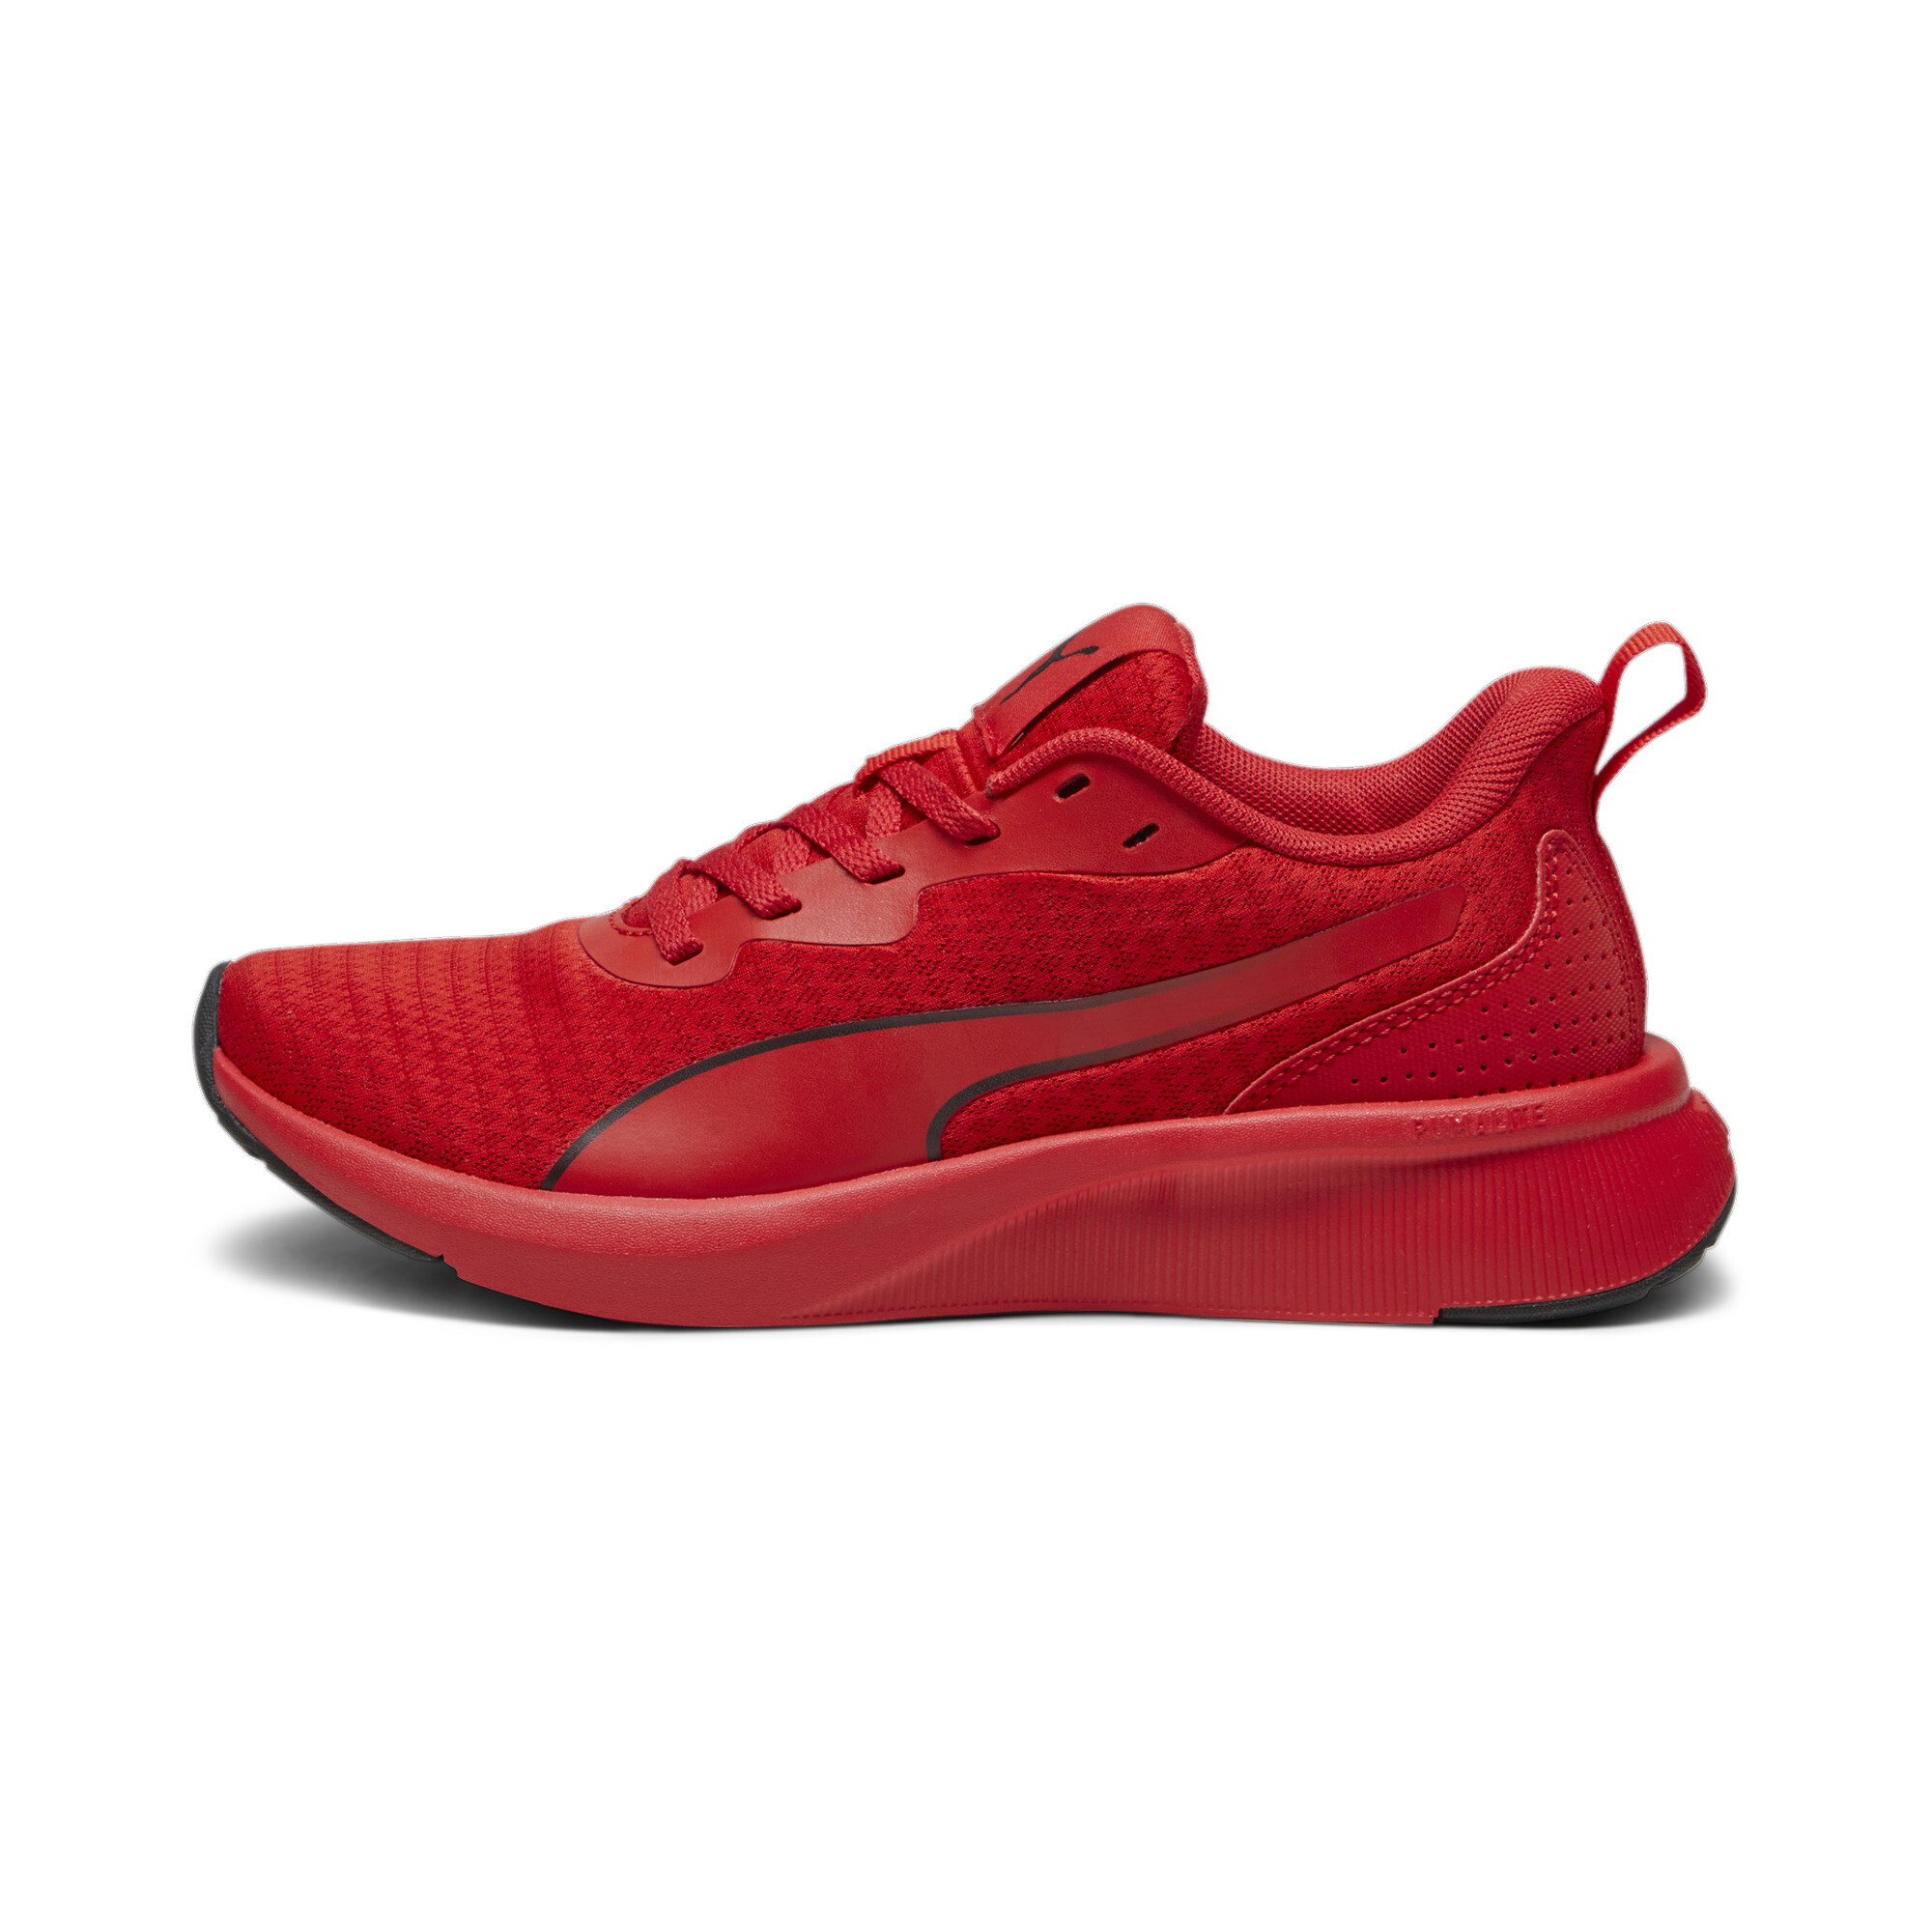 Puma Flyer Lite Youth Sneakers, Red, Size 38.5, Shoes